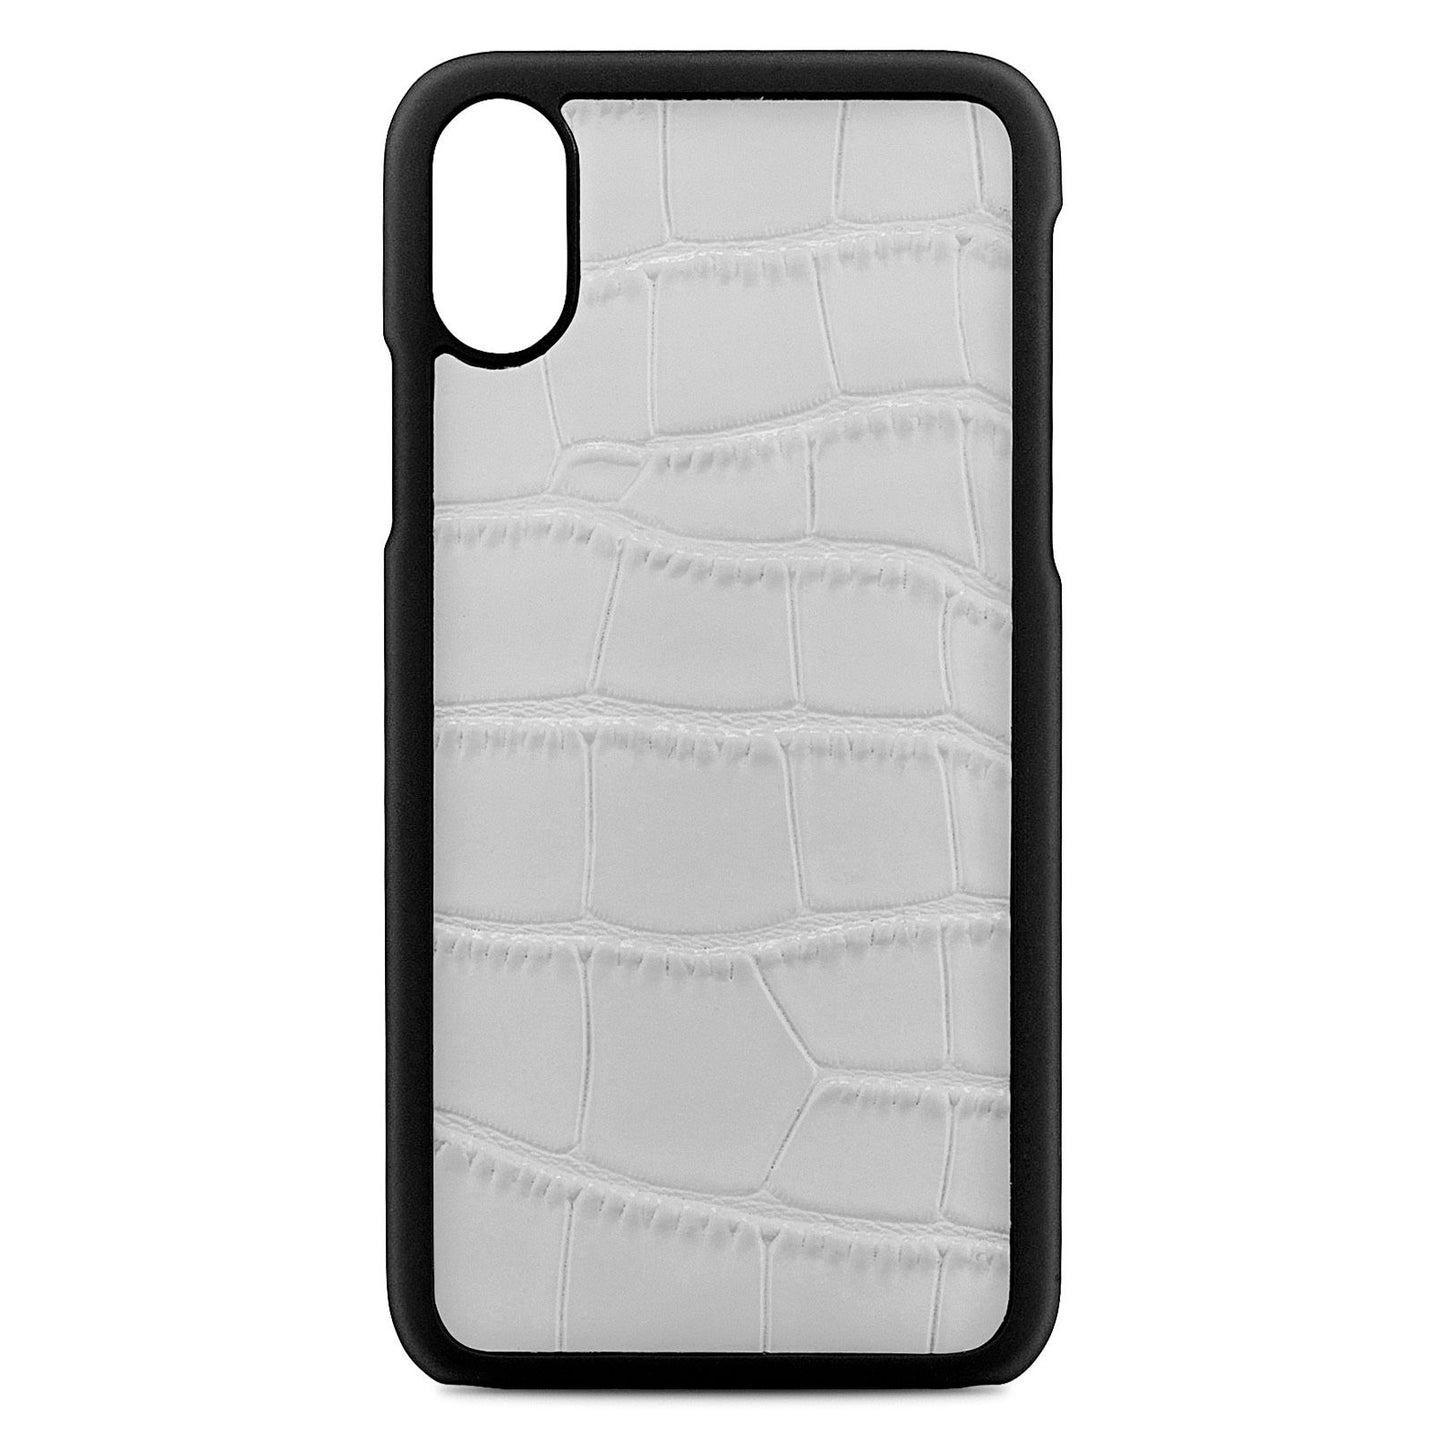 Blank Personalised Grey Croc Leather iPhone X Case